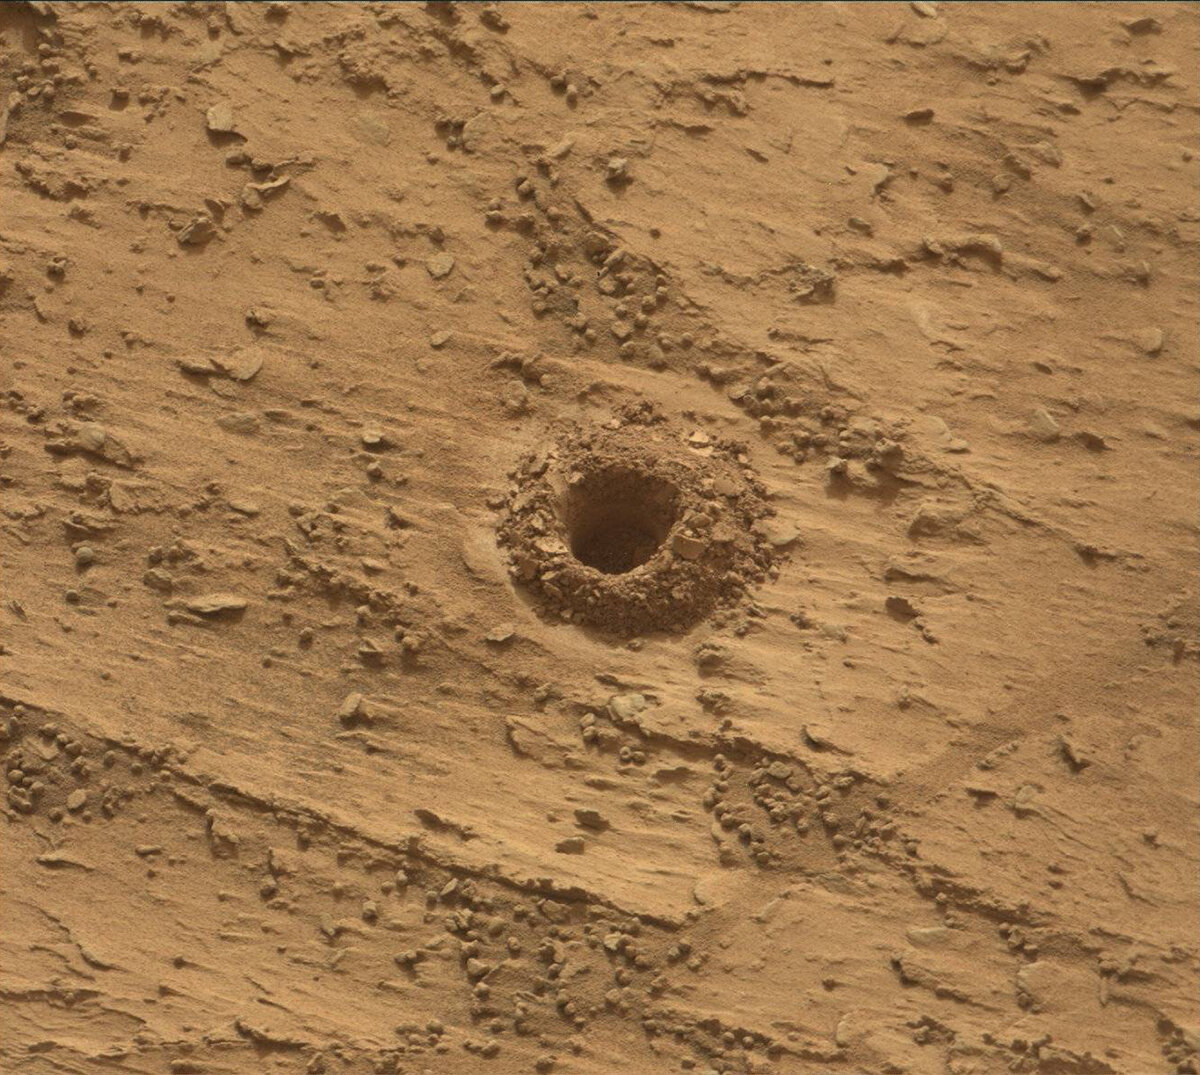 Mastcam image of Avanavero drill hole acquired on sol 3512.